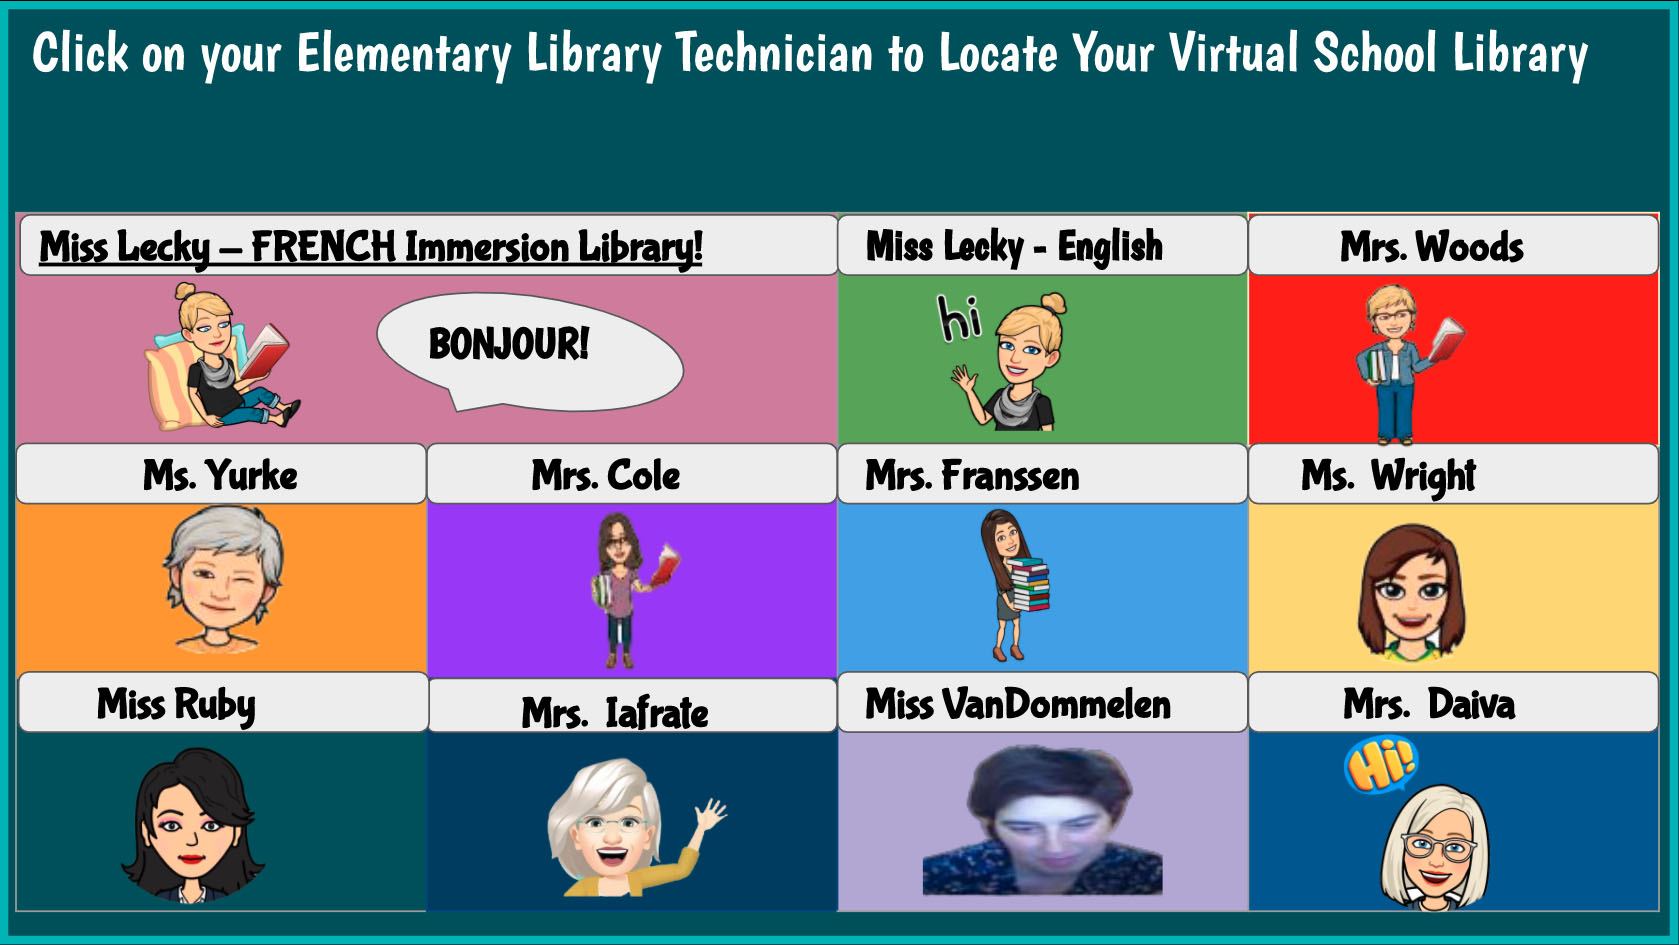 St. Clair Catholic Launches Virtual Libraries to Help Keep Students Engaged